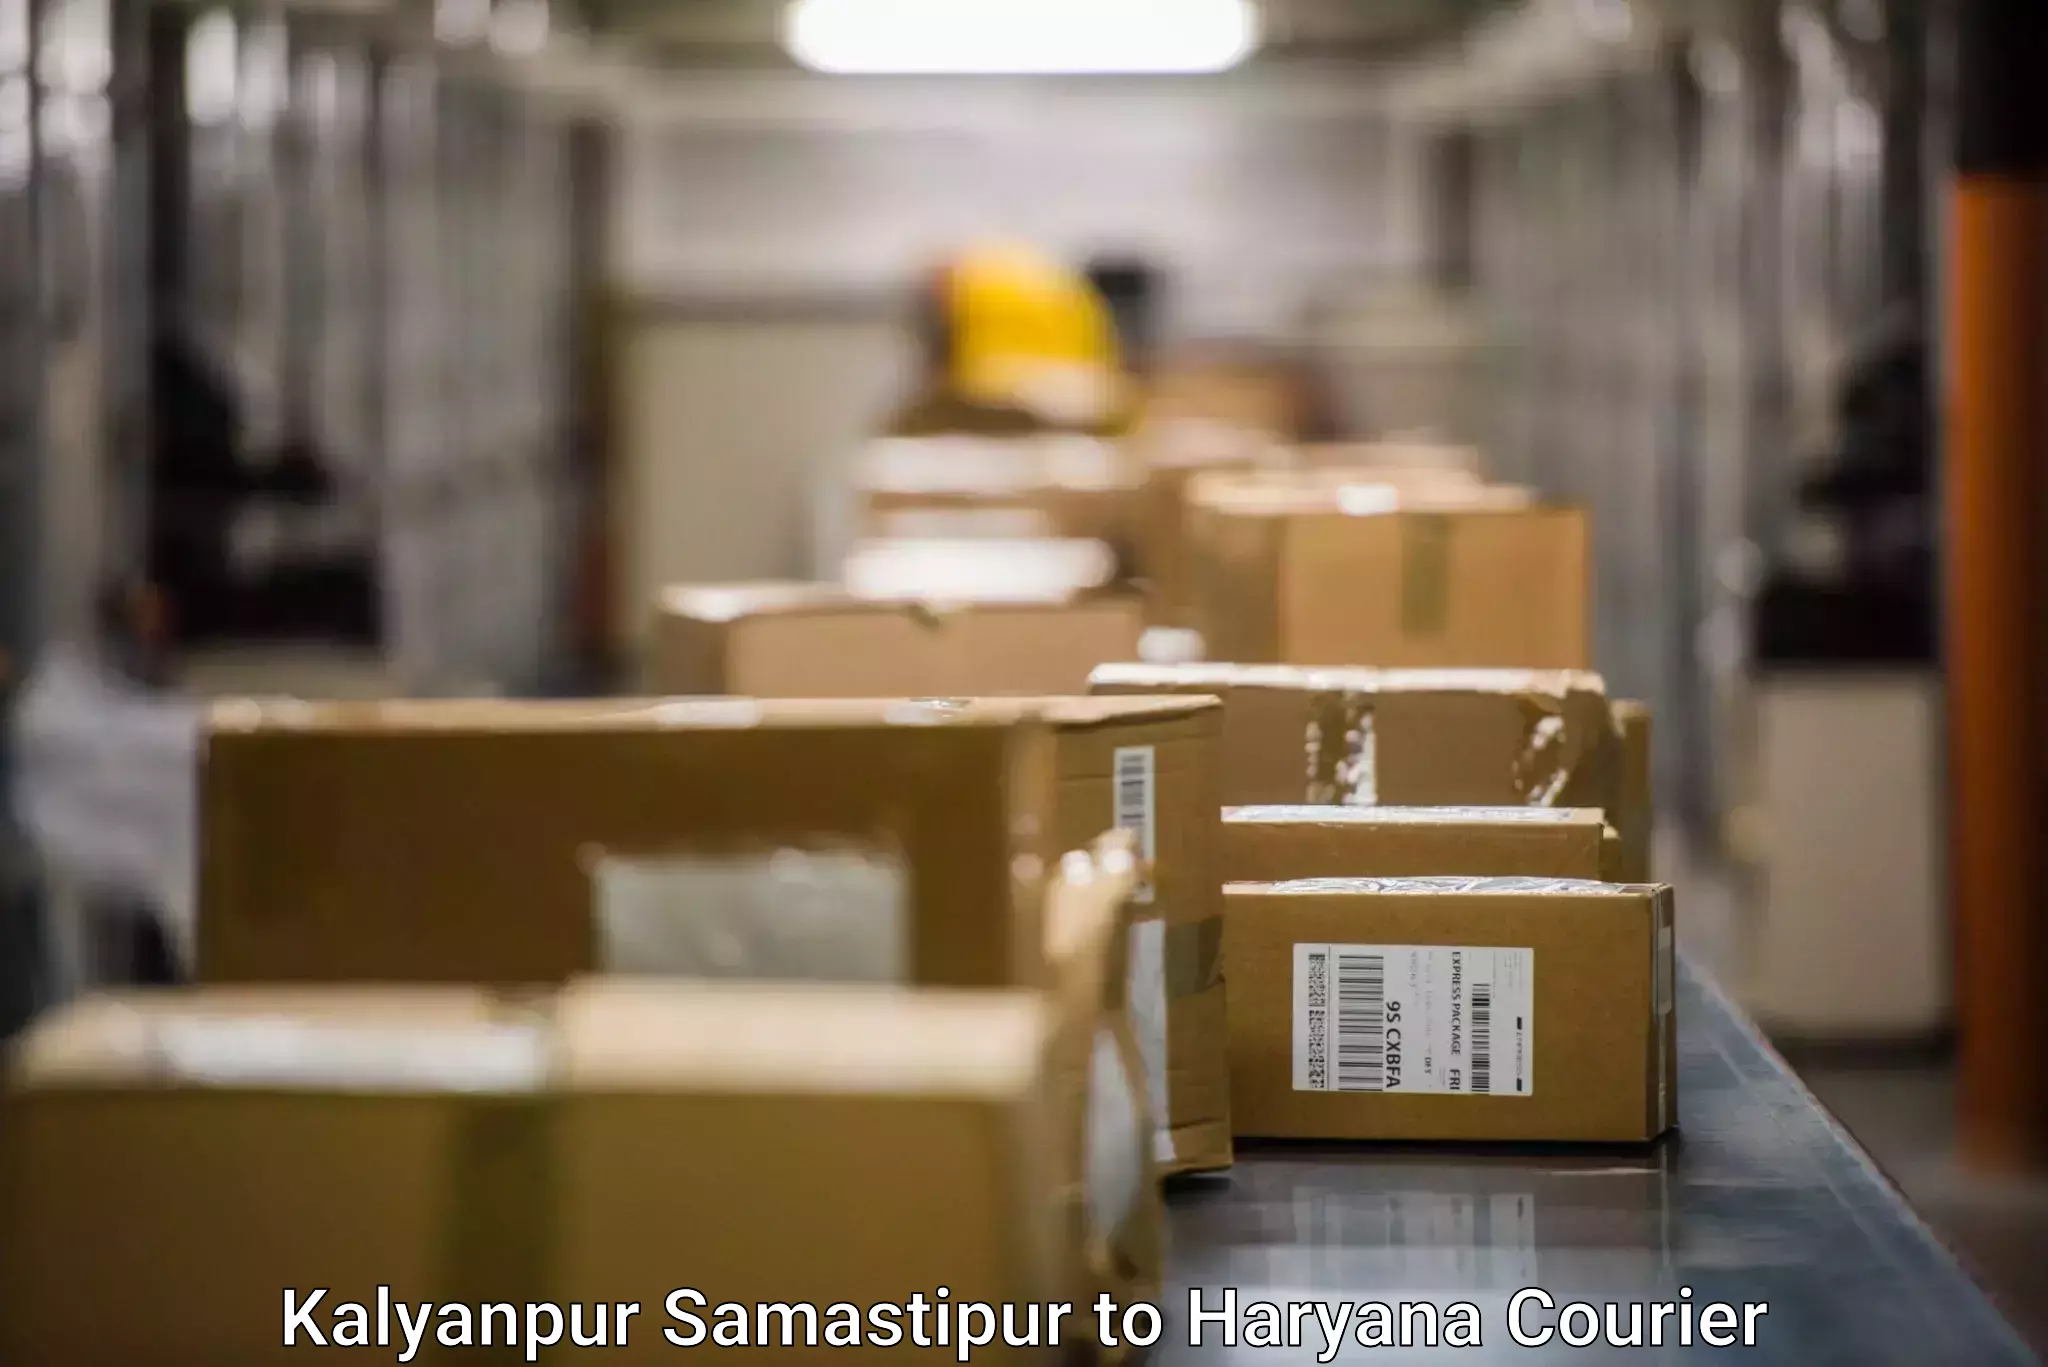 Flexible delivery schedules Kalyanpur Samastipur to Ambala